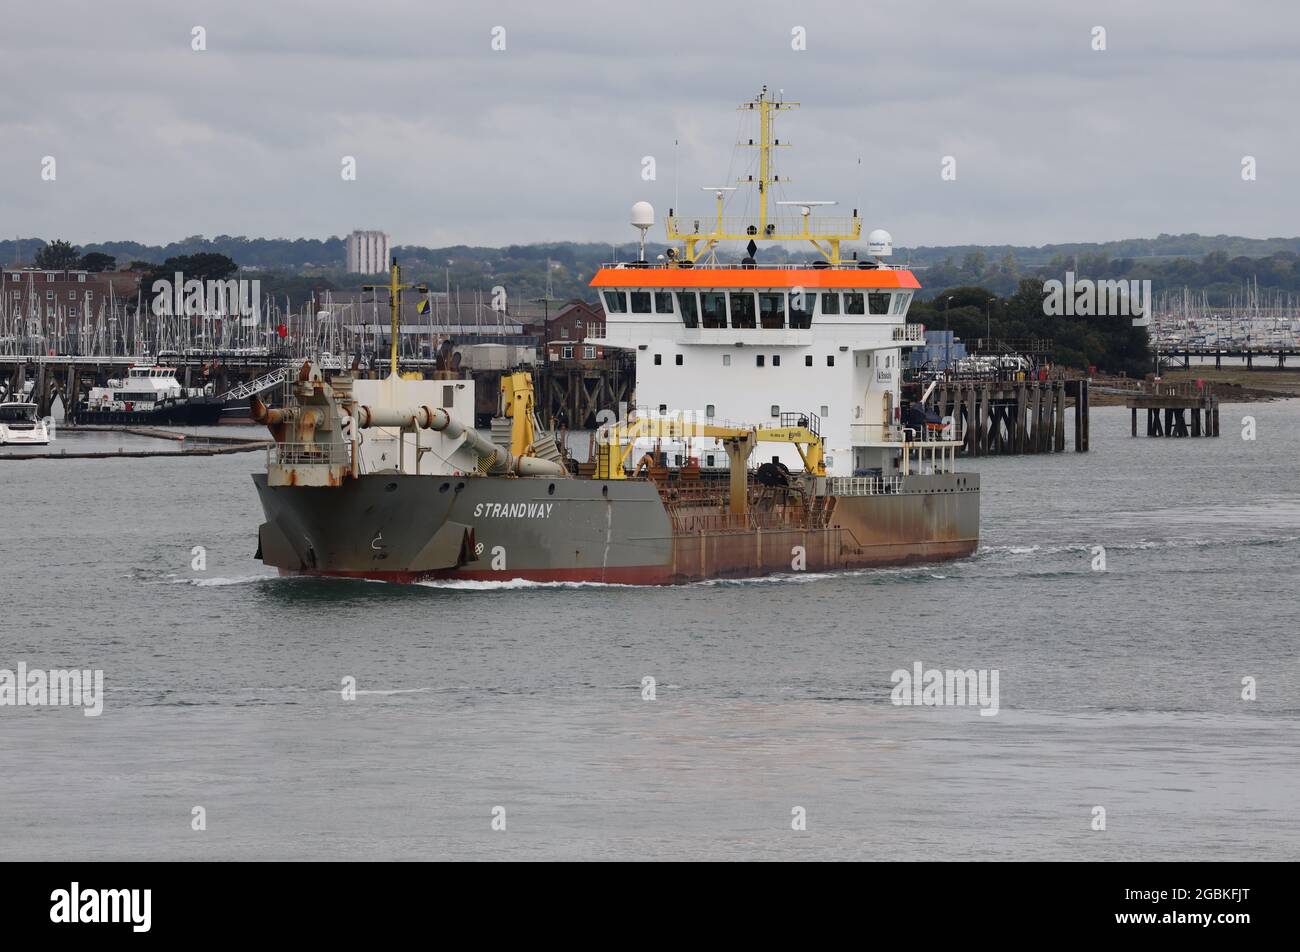 The Cypriot registered hopper dredger STRANDWAY heads out of the harbour after completing work in and around the Naval Base Stock Photo